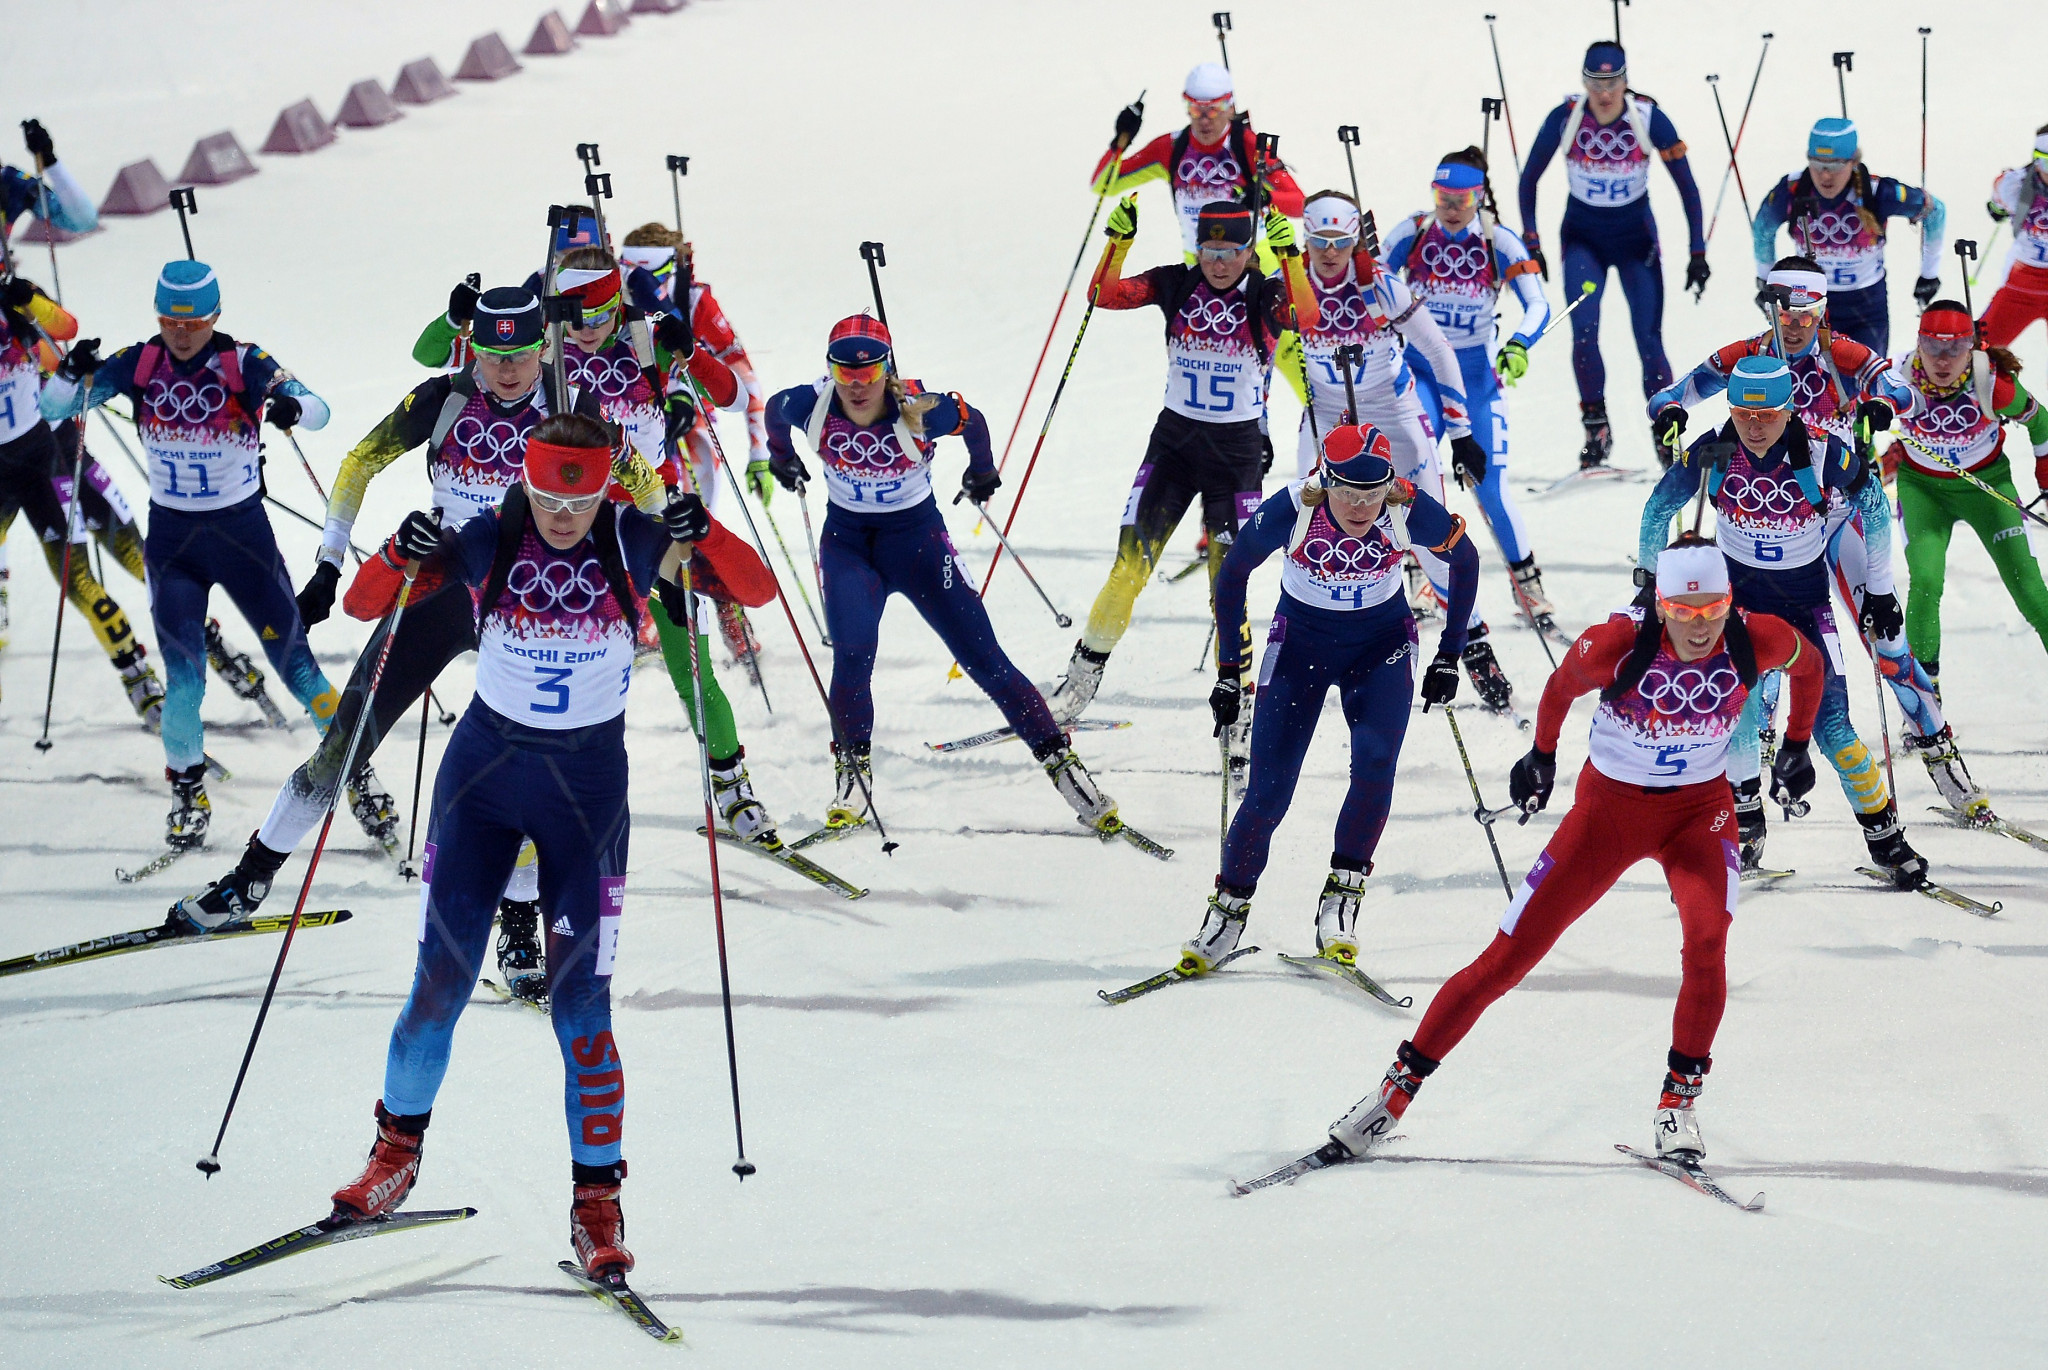 Selina Gasparin, front right, won Switzerland's first silver medal in biathlon at Sochi 2014 ©Getty Images